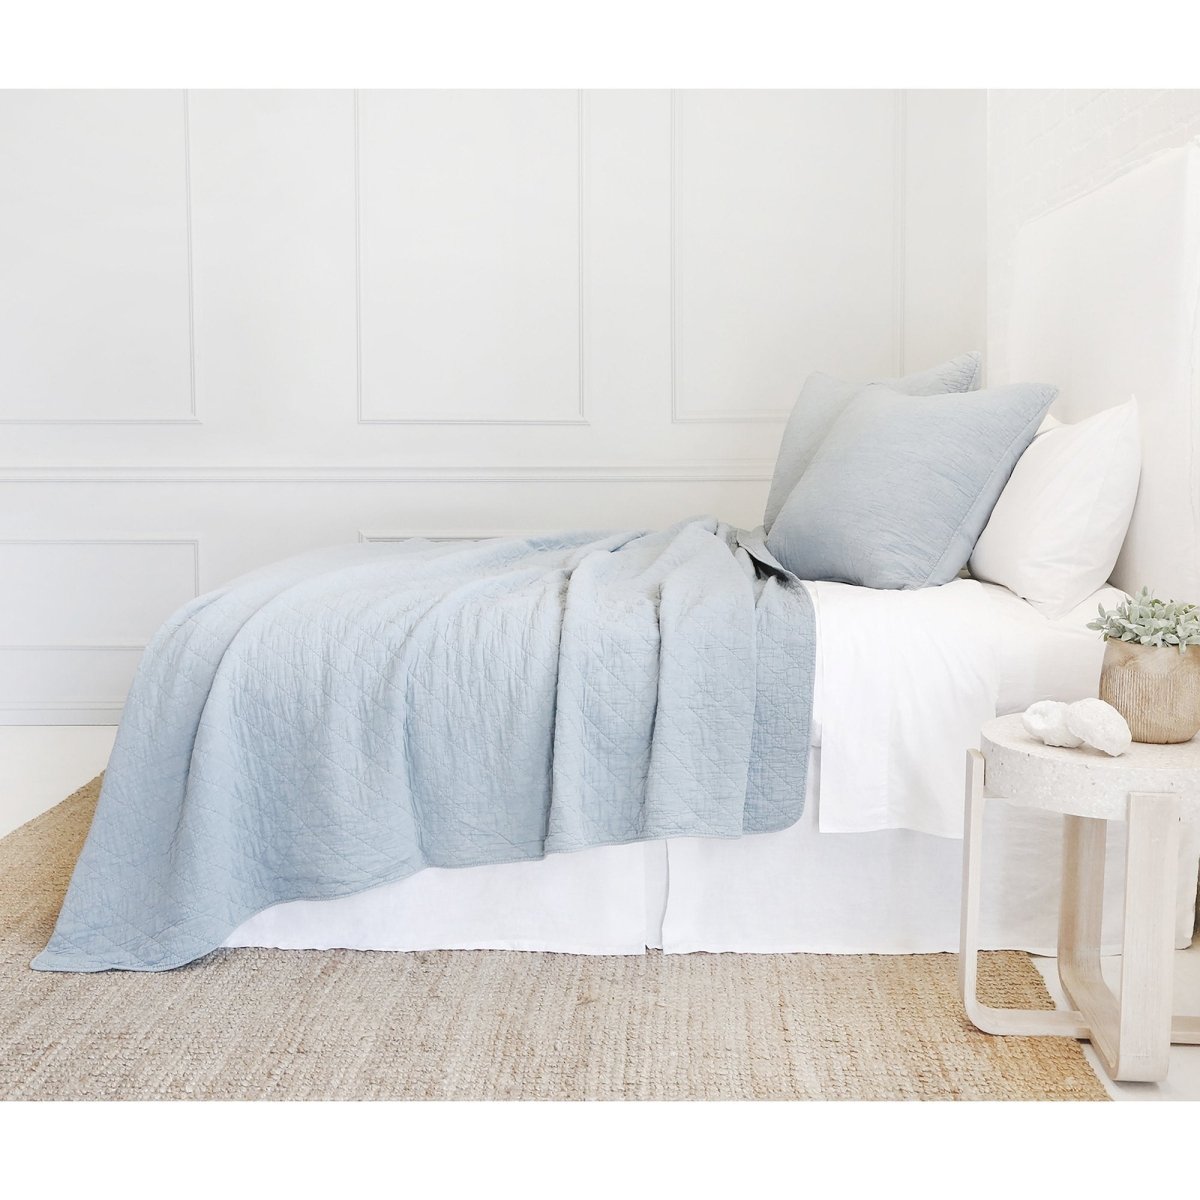 Fig Linens - Pom Pom at Home Bedding - Blue Coverlet and shams Collection